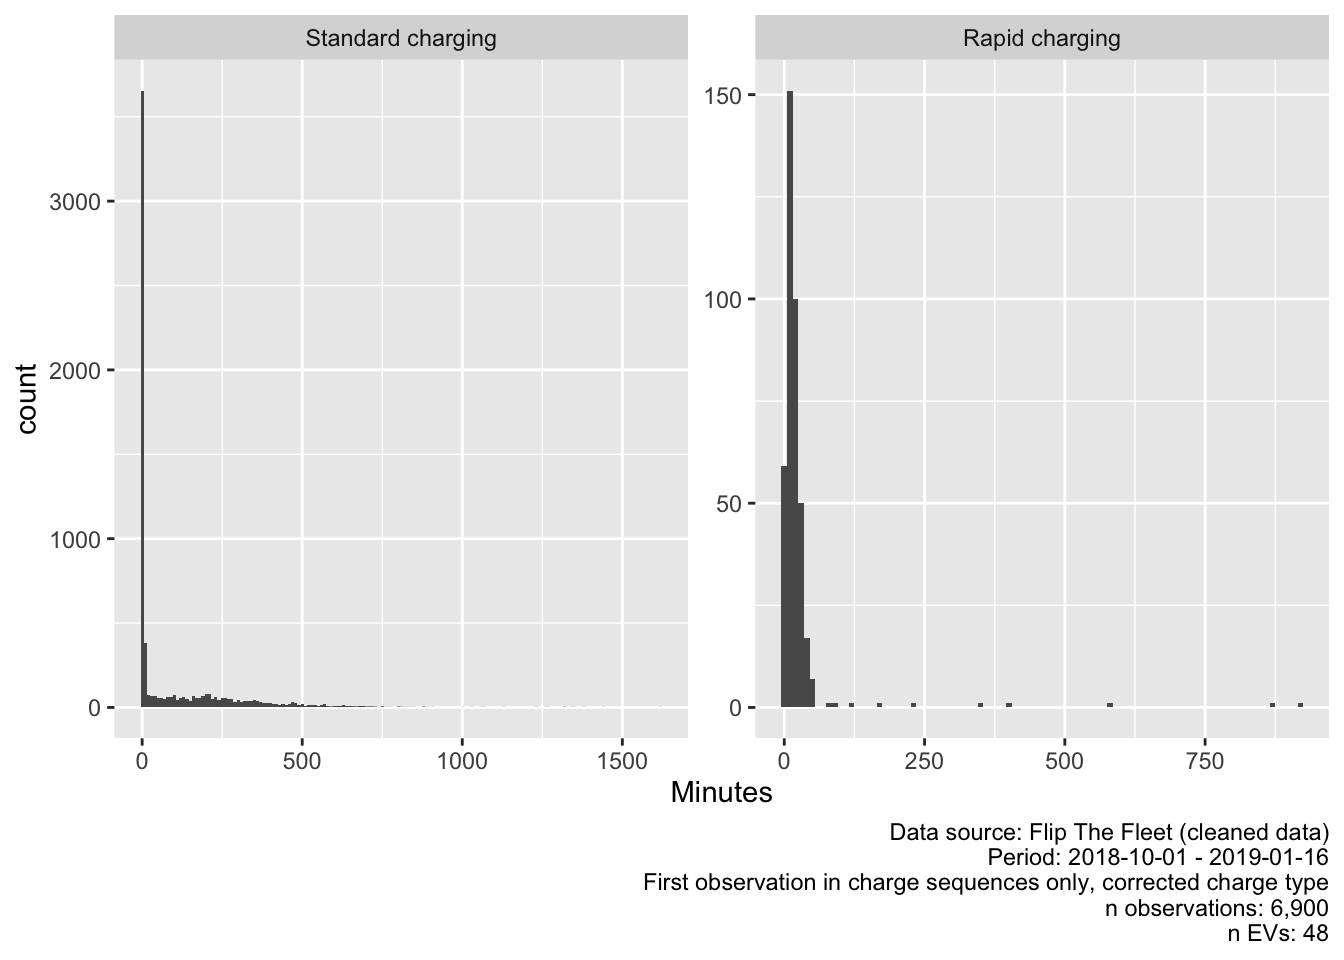 Duration of charging sequences by corrected charge type